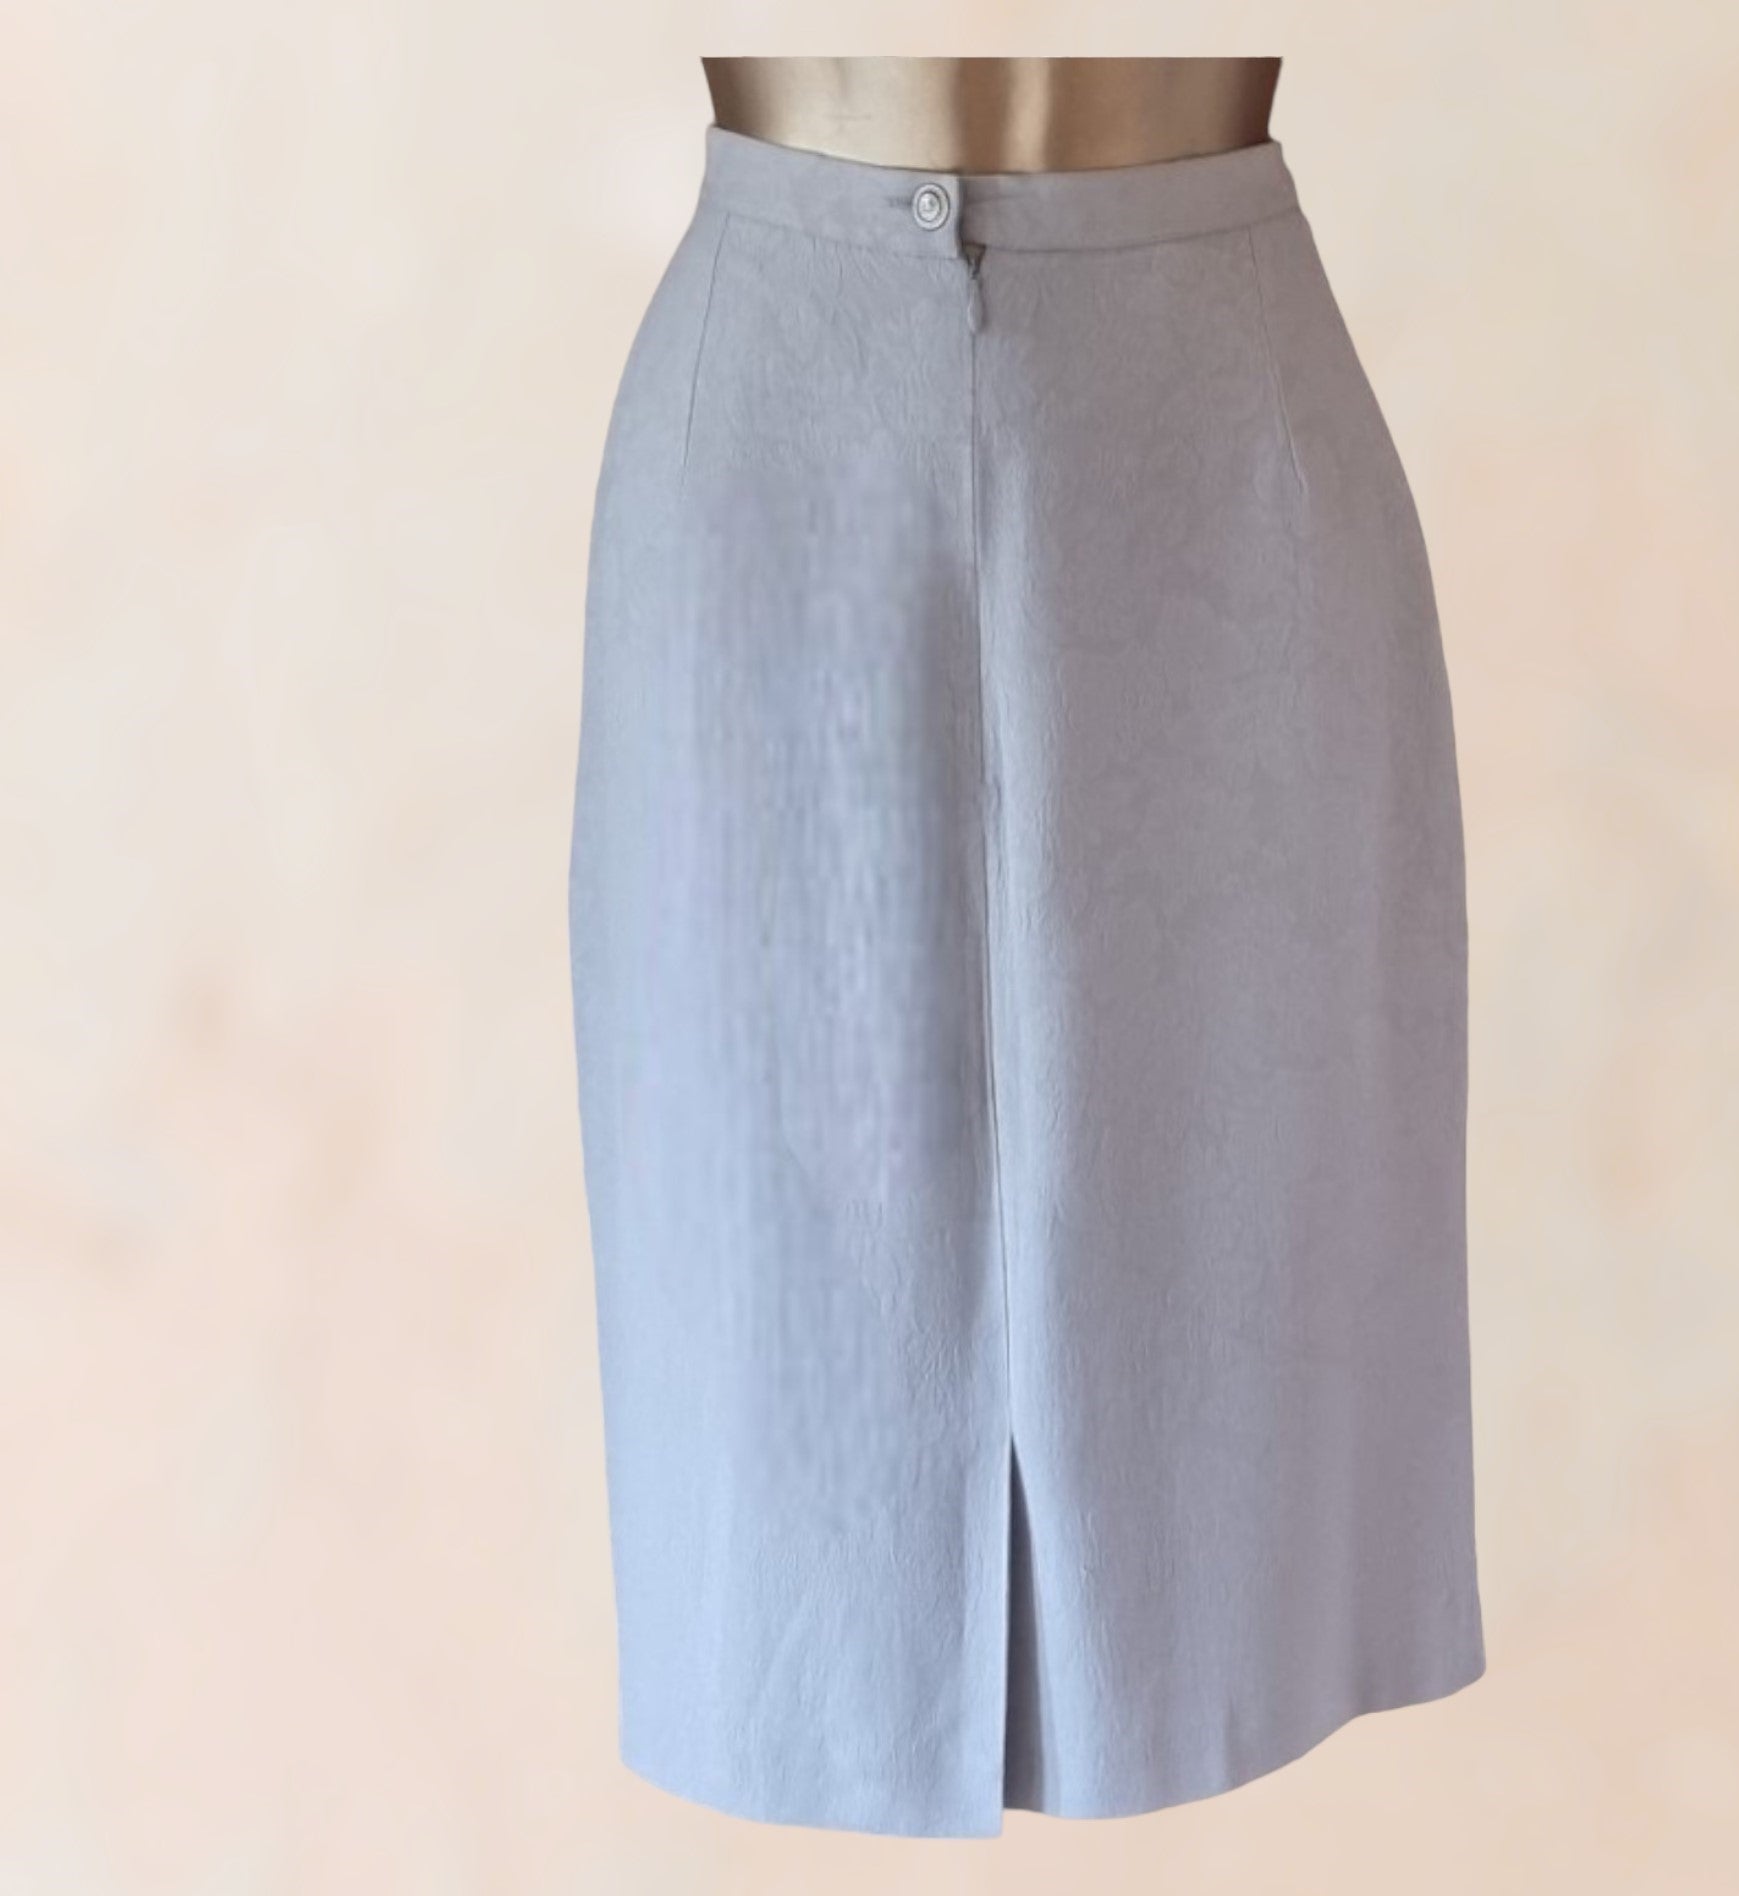 Louise Kennedy Silver Grey Lined Pencil Skirt UK 8 US 4 EU 36 Timeless Fashions